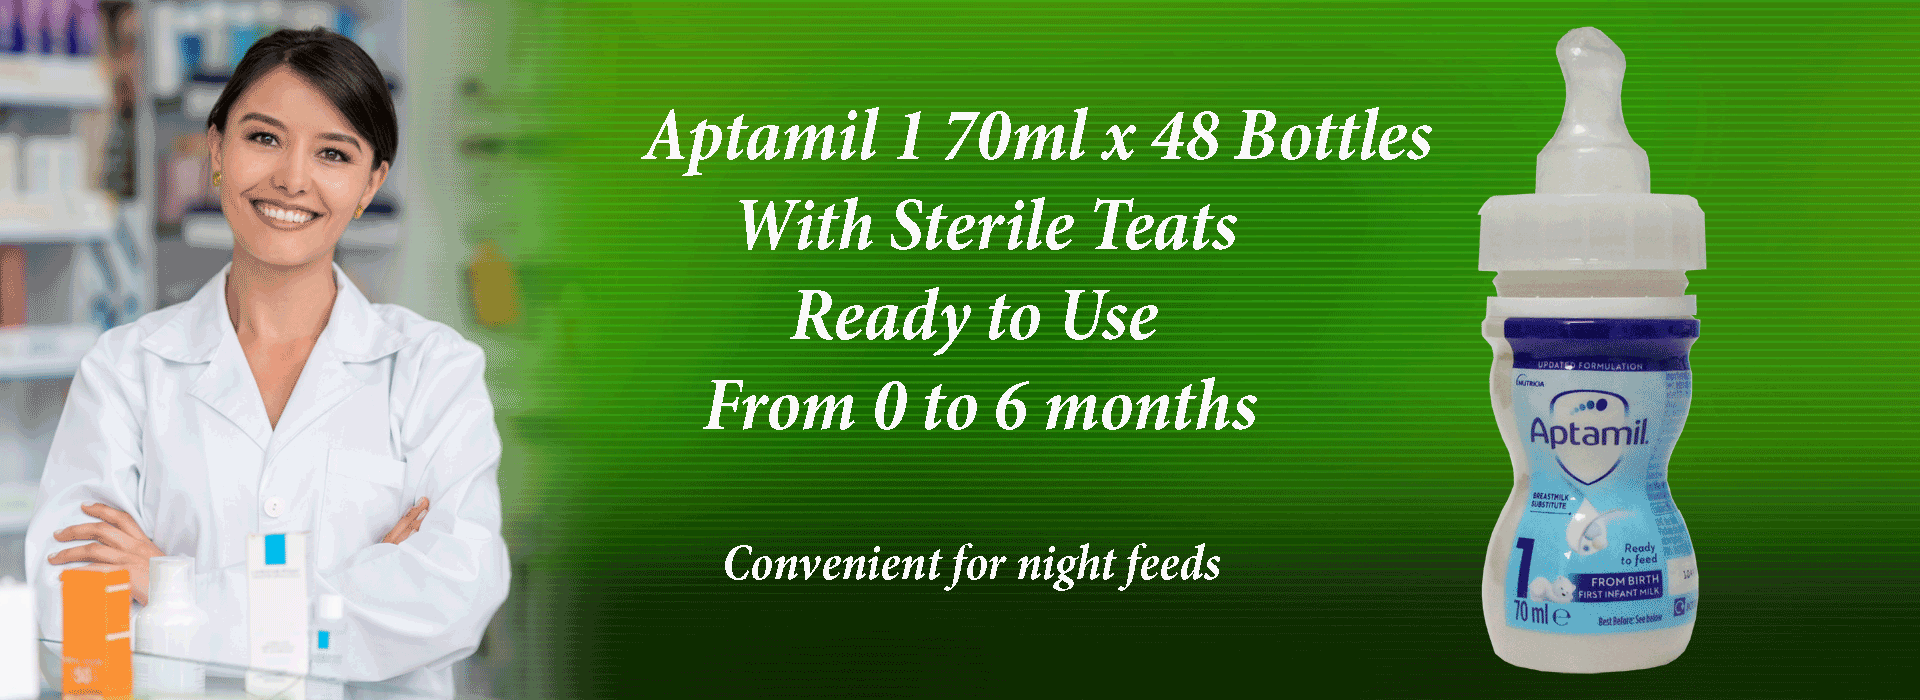 We stock baby milk, Aptamil, Cow and Gate, SMA, NUK, Dr Browns and Nutriprem